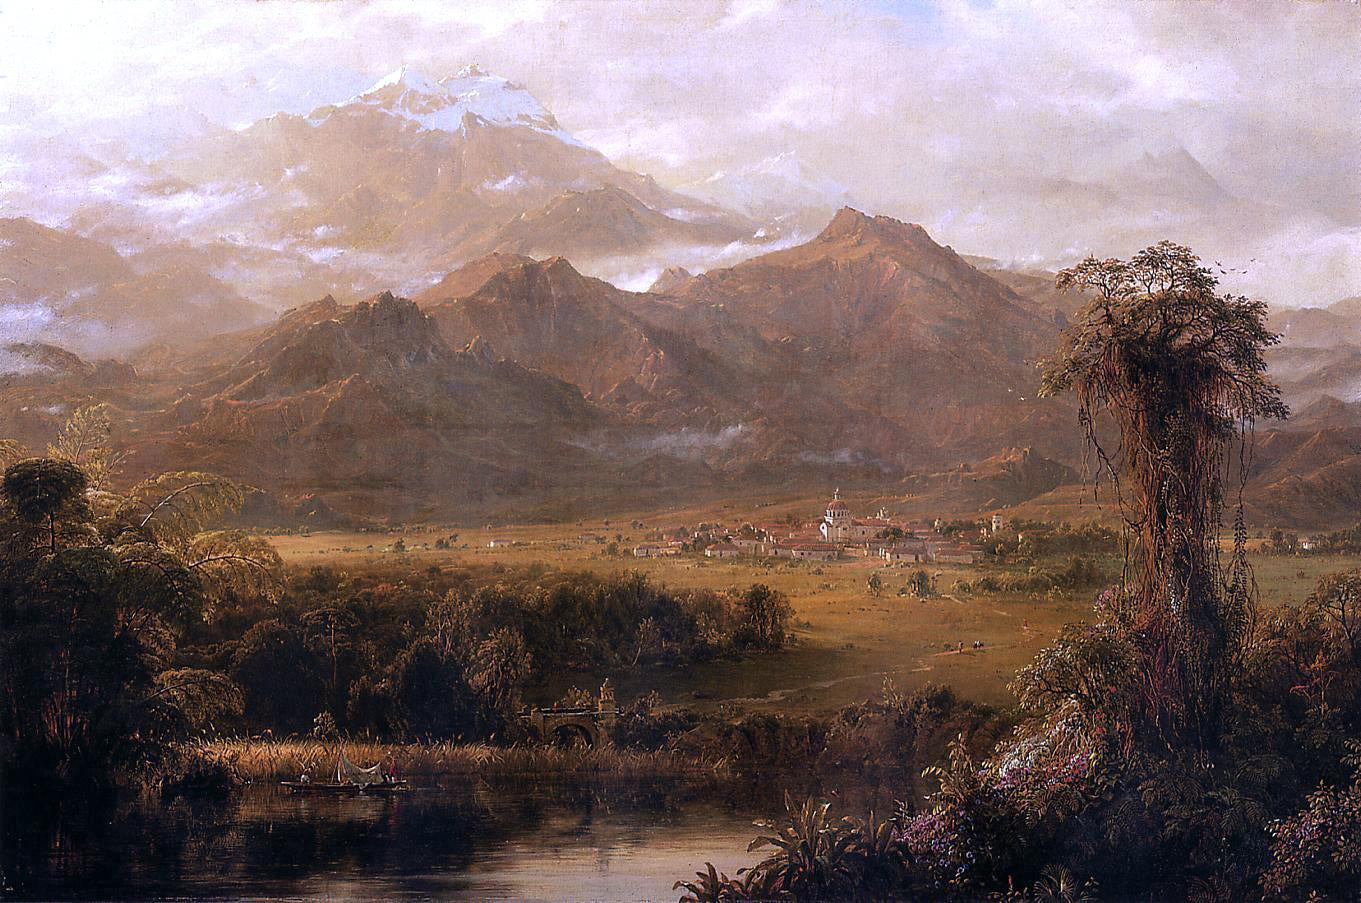  Norton Bush View of Mountains in Ecuador (also known as A Tropical Morning) - Hand Painted Oil Painting